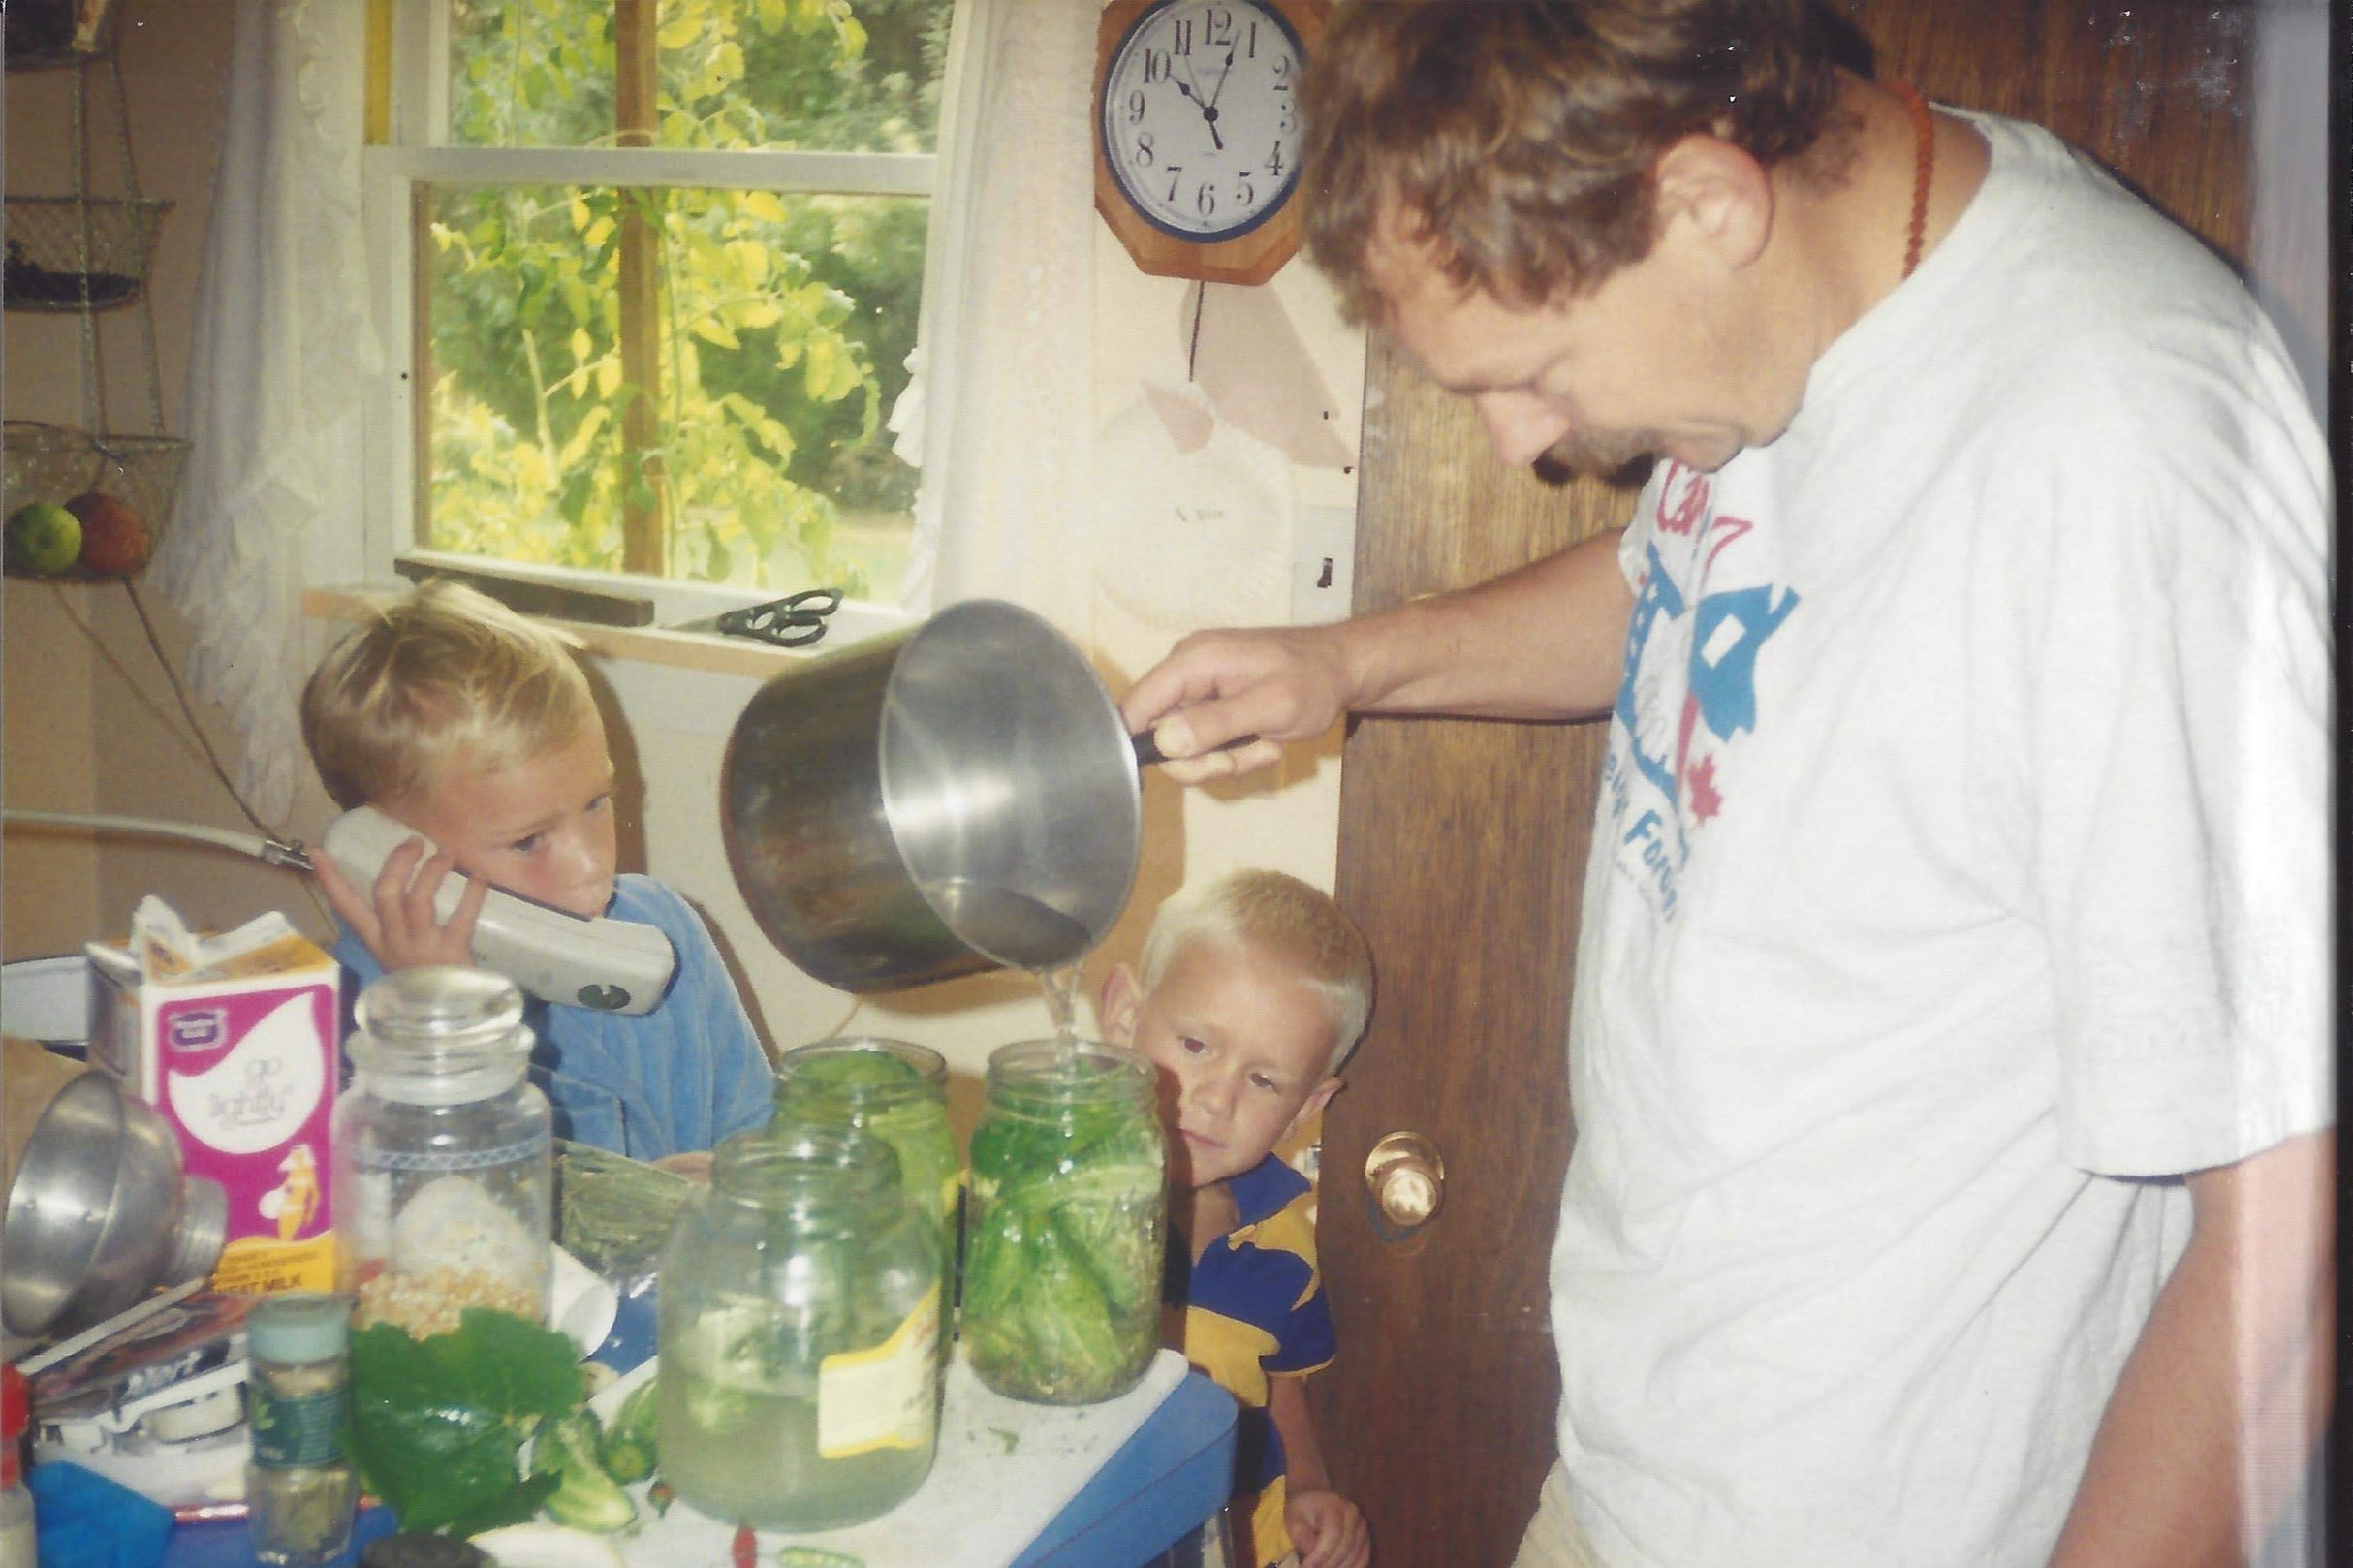 Ken making pickles with his sons